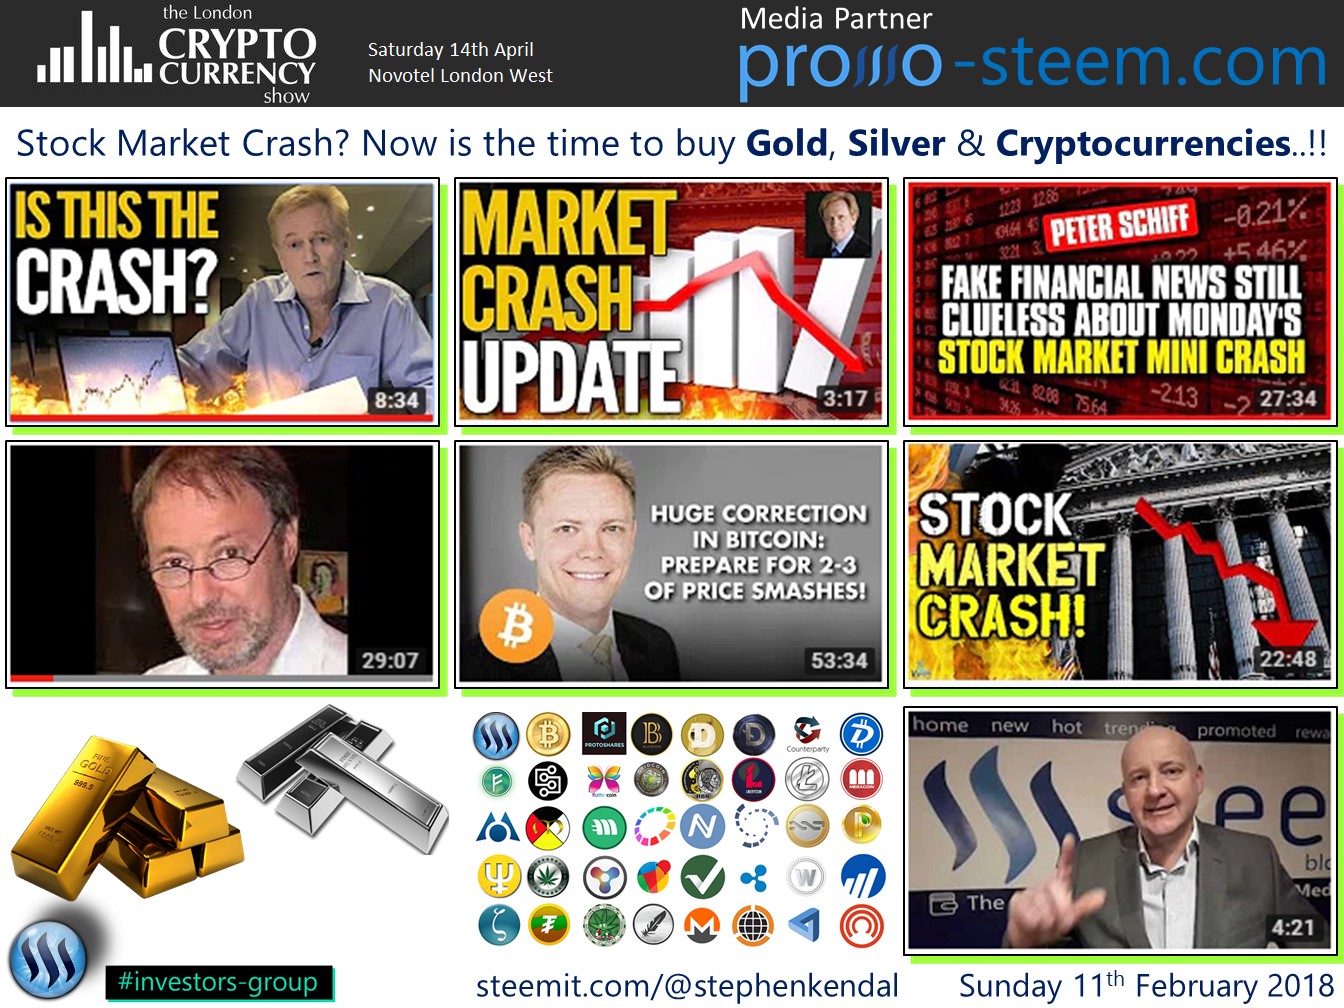 Promo-Steem Stock Market Crash. Now is the time to buy Gold, Silver and Cryptocurrencies.jpg